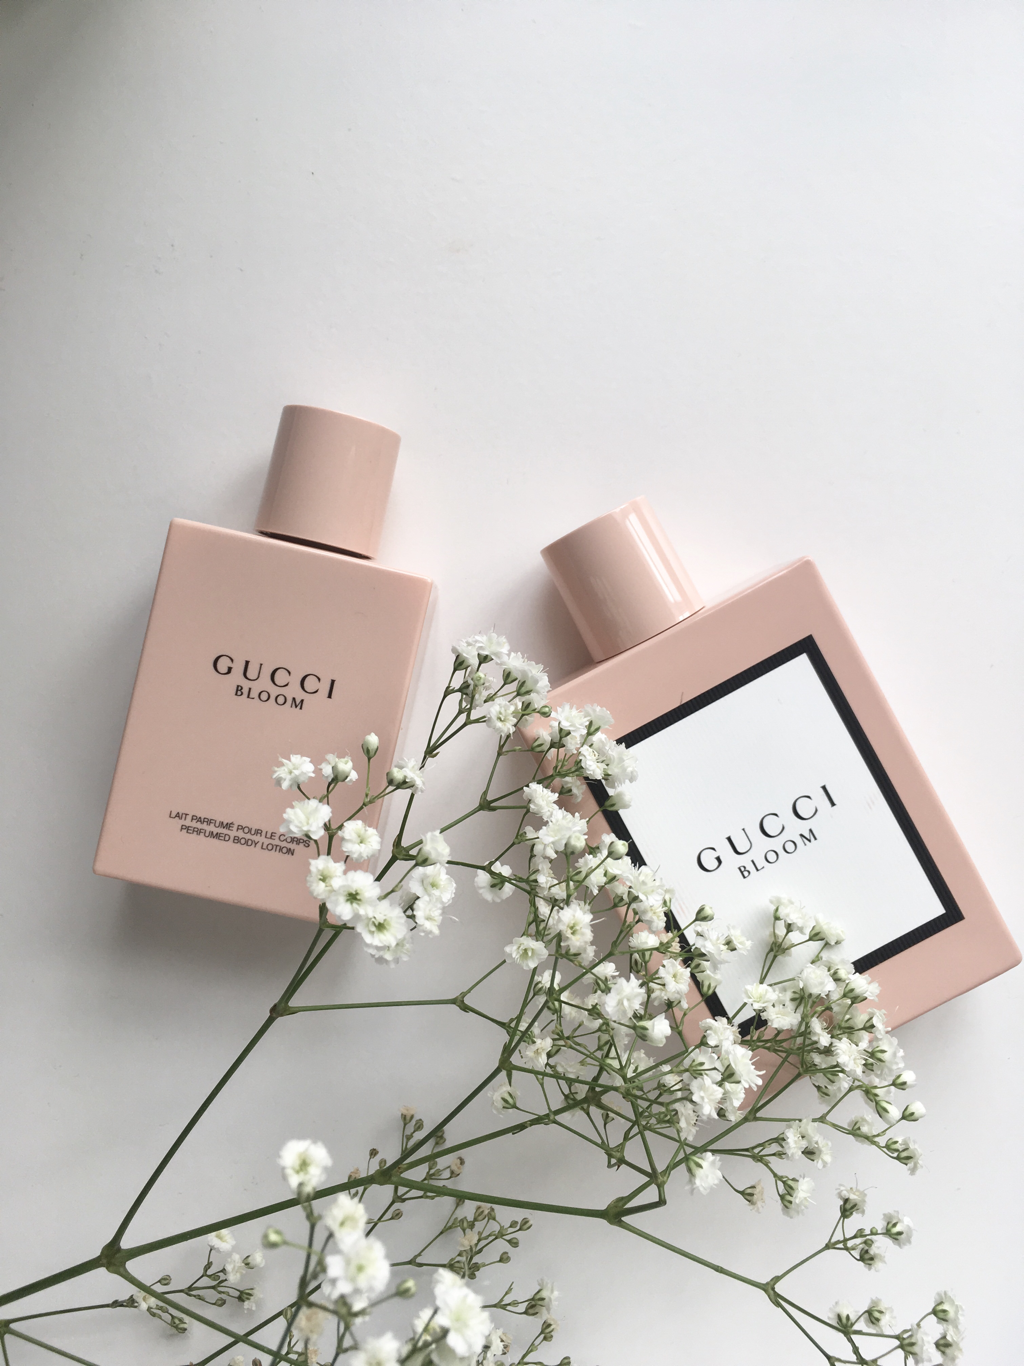 bloom by gucci review